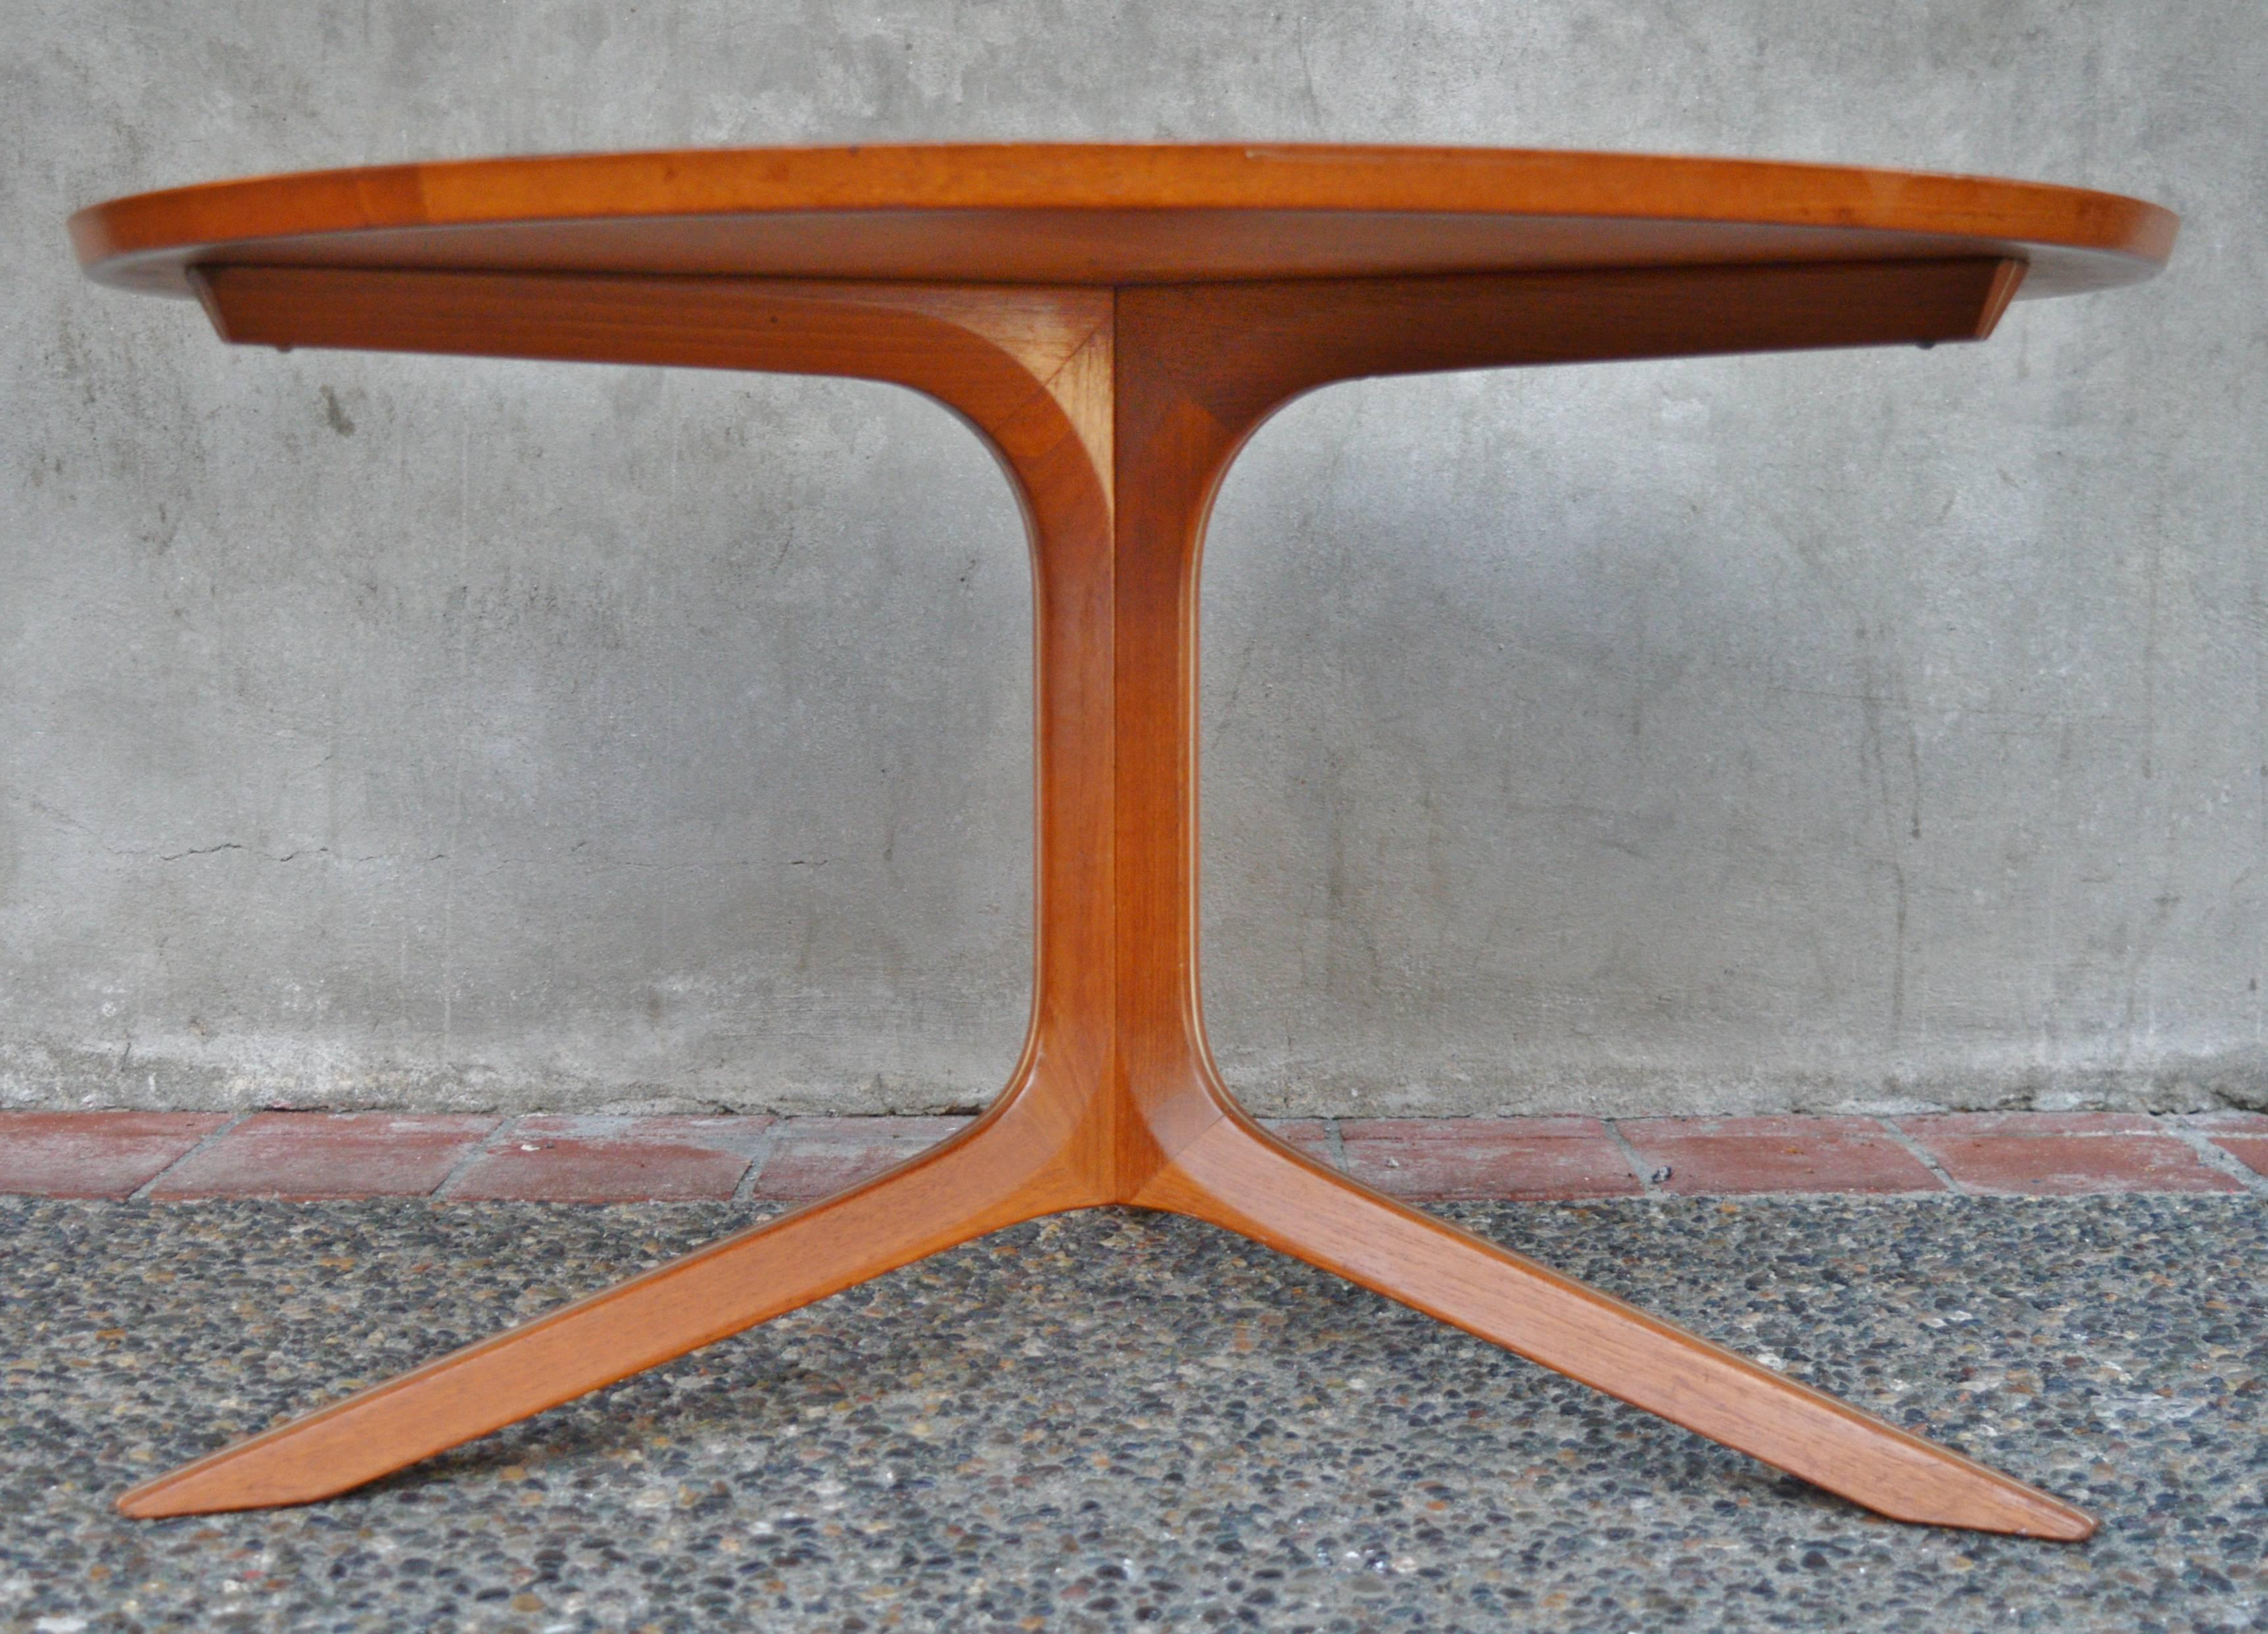 This lovely and rare, more compact round teak coffee table was designed by Peter Hvidt & Orla Mølgaard-Nielsen for France & Son in the 1960s. Part of their silver line series of tables and seating - note the aluminium strip that is sandwiched